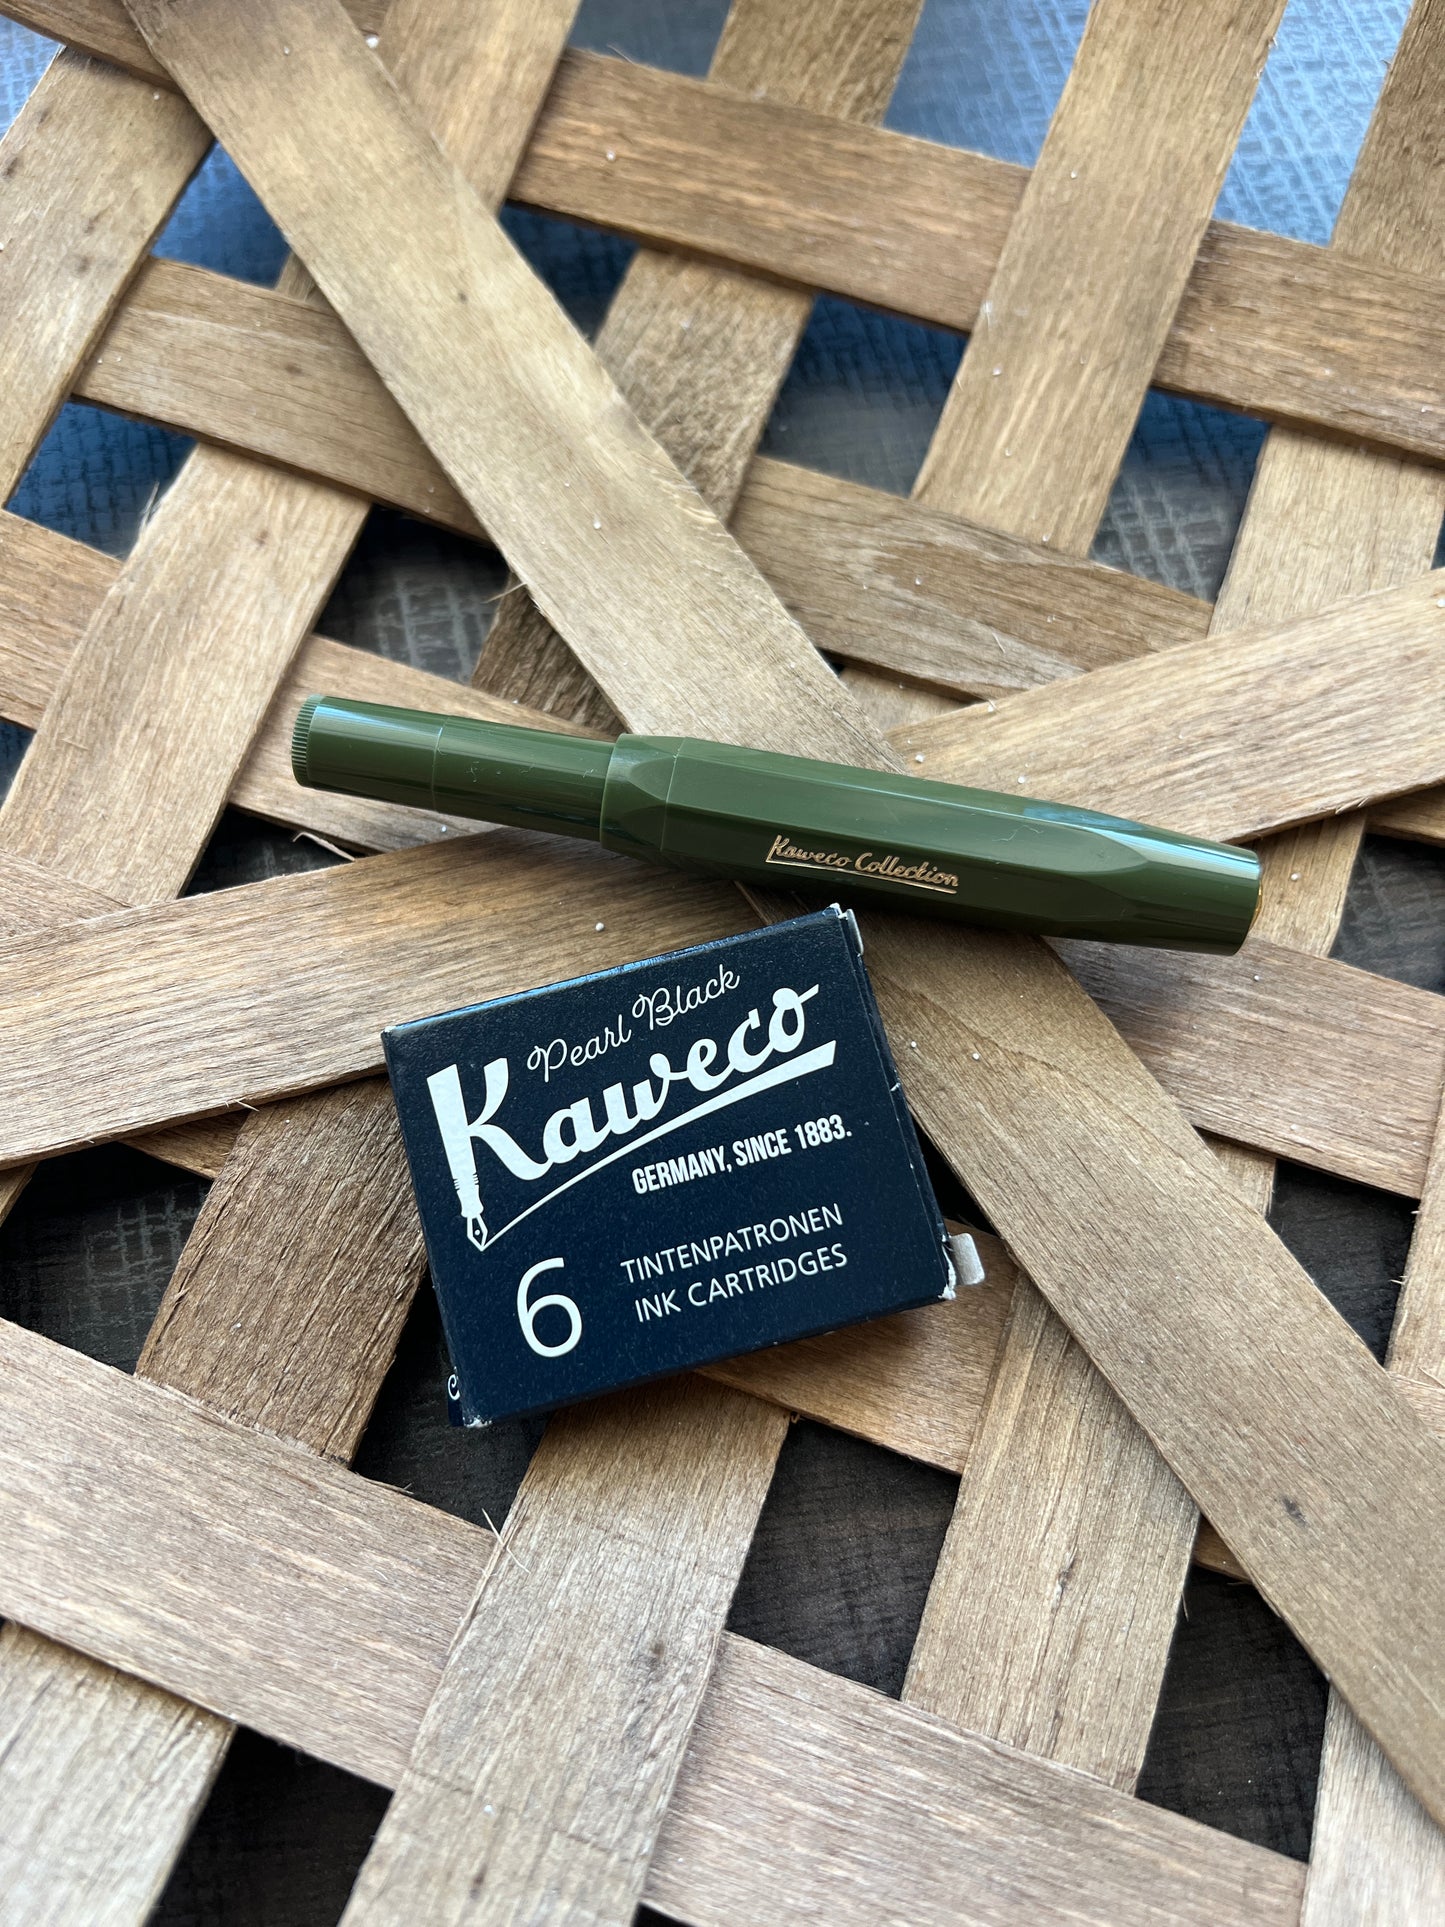 Preowned: Kaweco Sport Fountain Pen (Collector’s Edition- Dark Olive) w/ Refills